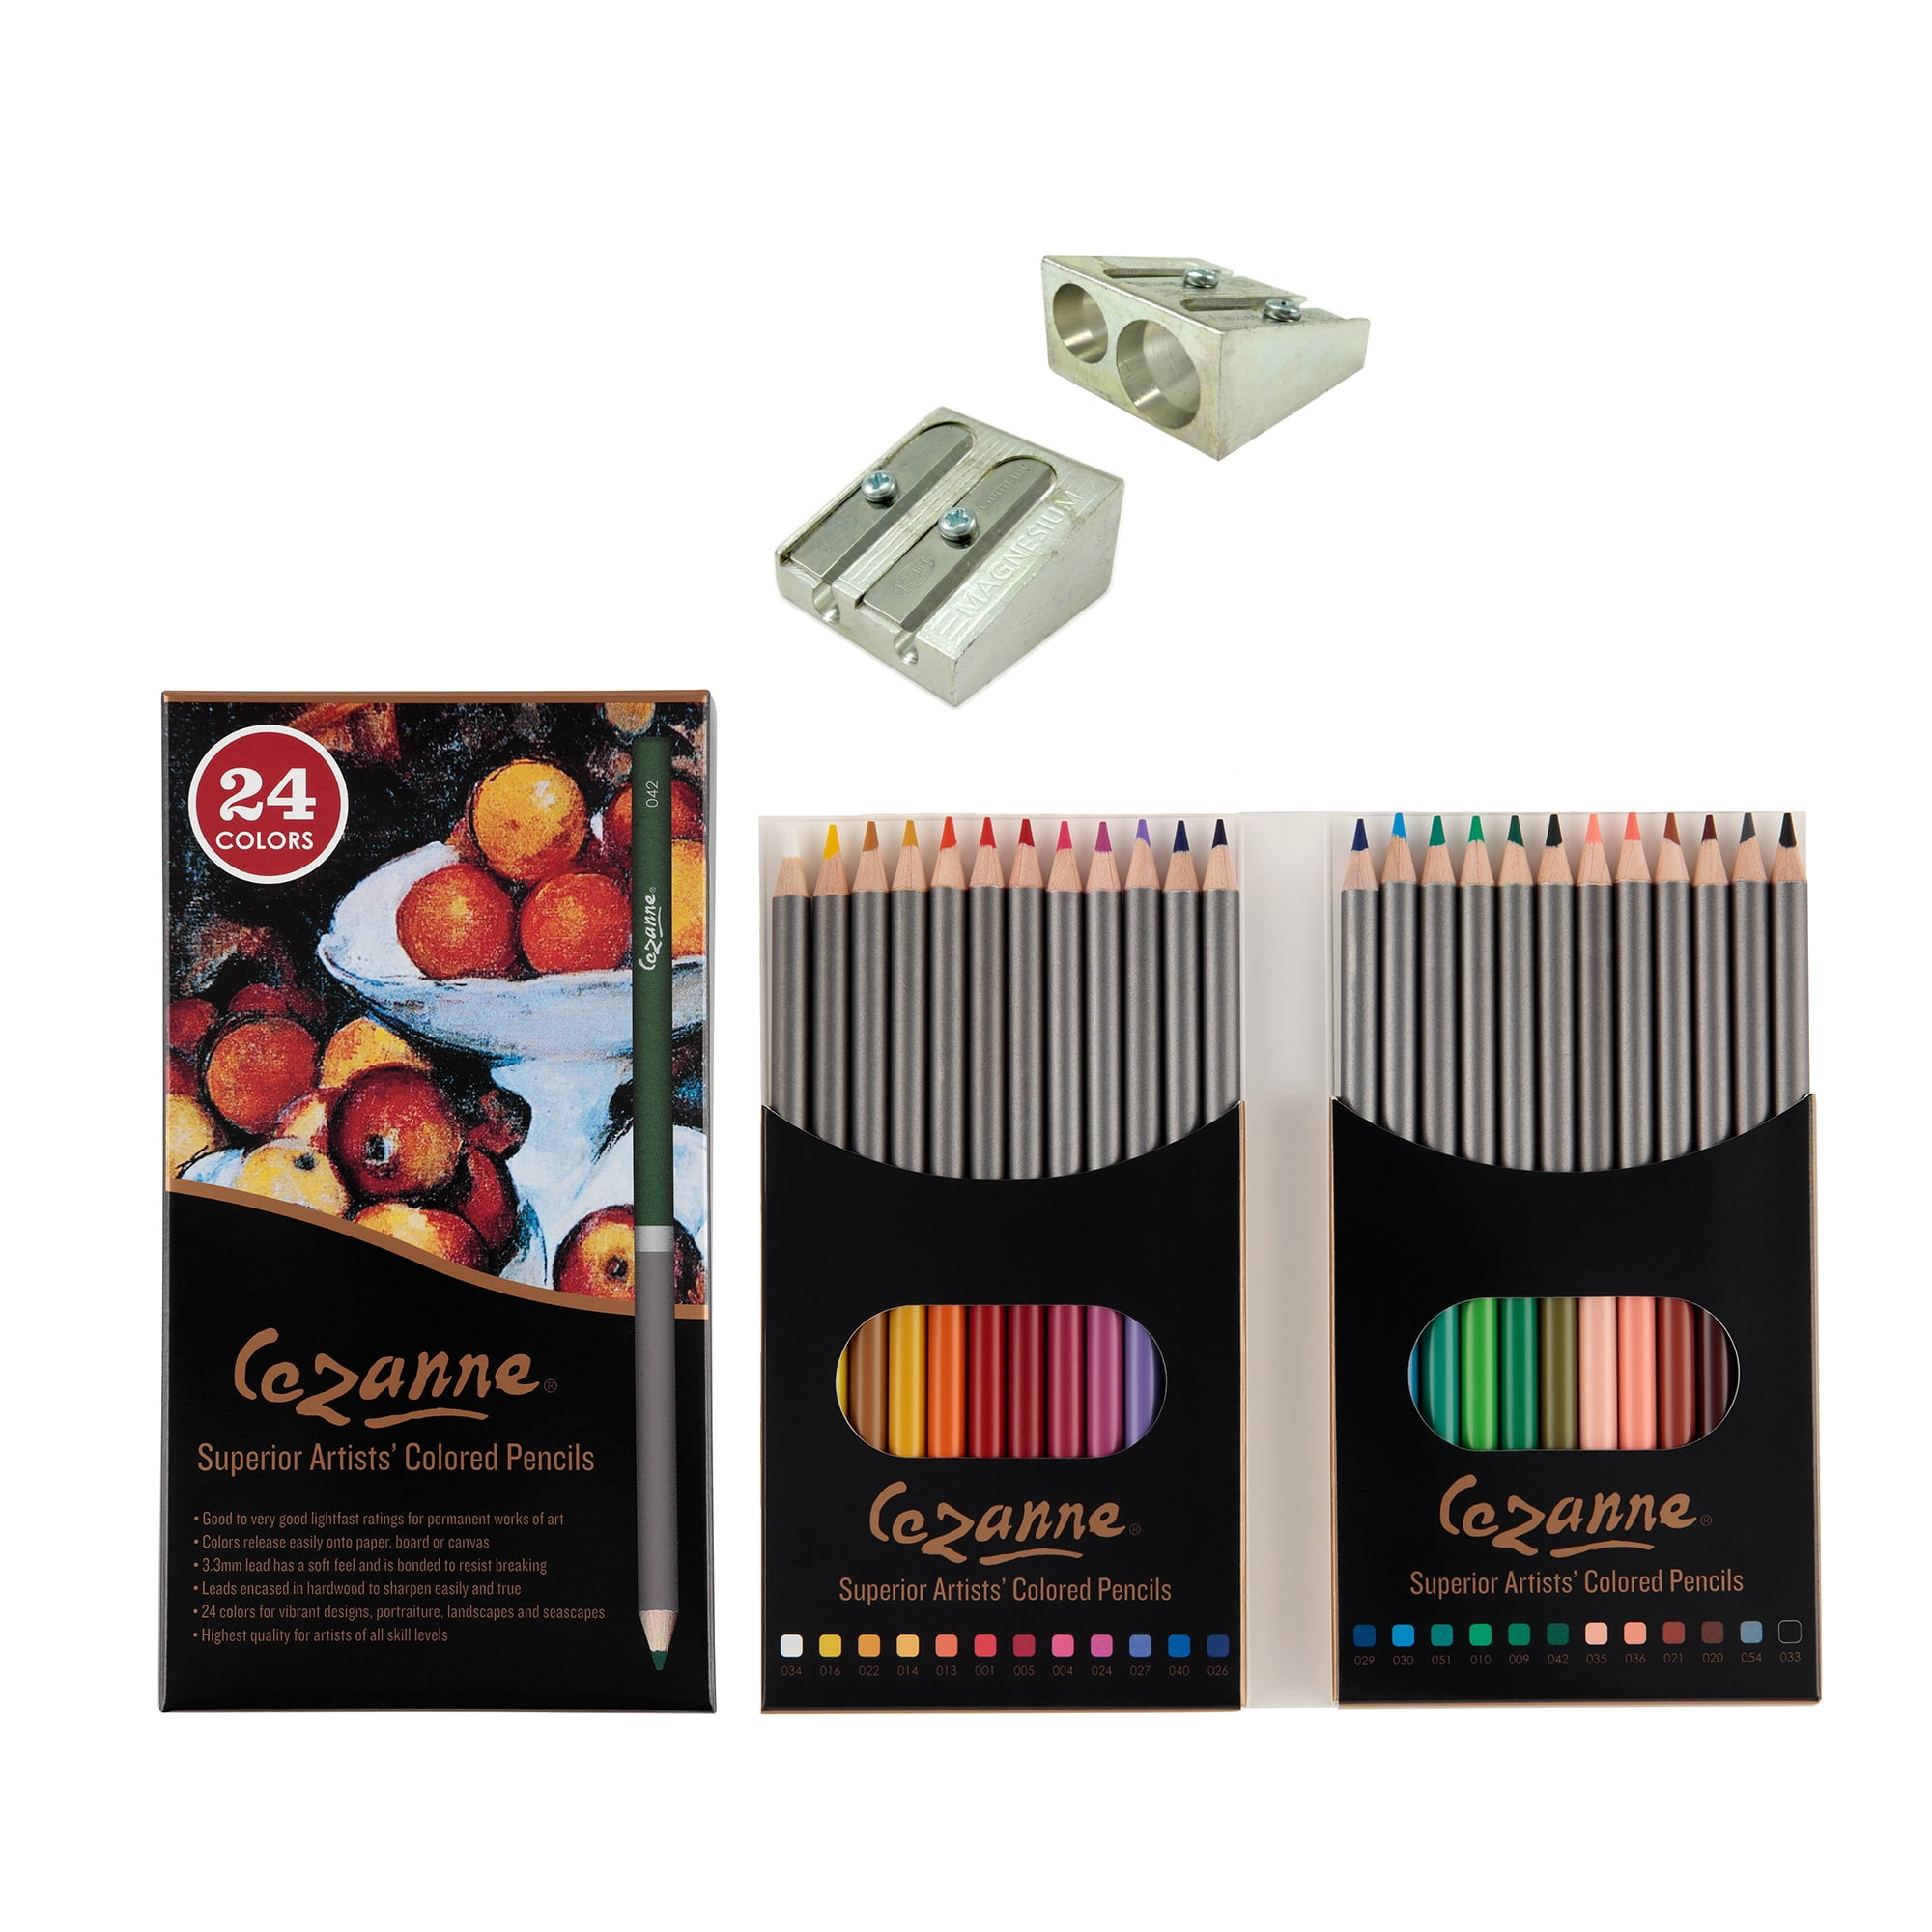 Jerry 's Artarama Jerry's Artarama Jerry's Artarama 72 Count Colored Pencil and Sharpener Bundle Set, Professional Colored Pencils for Artists Tin Set